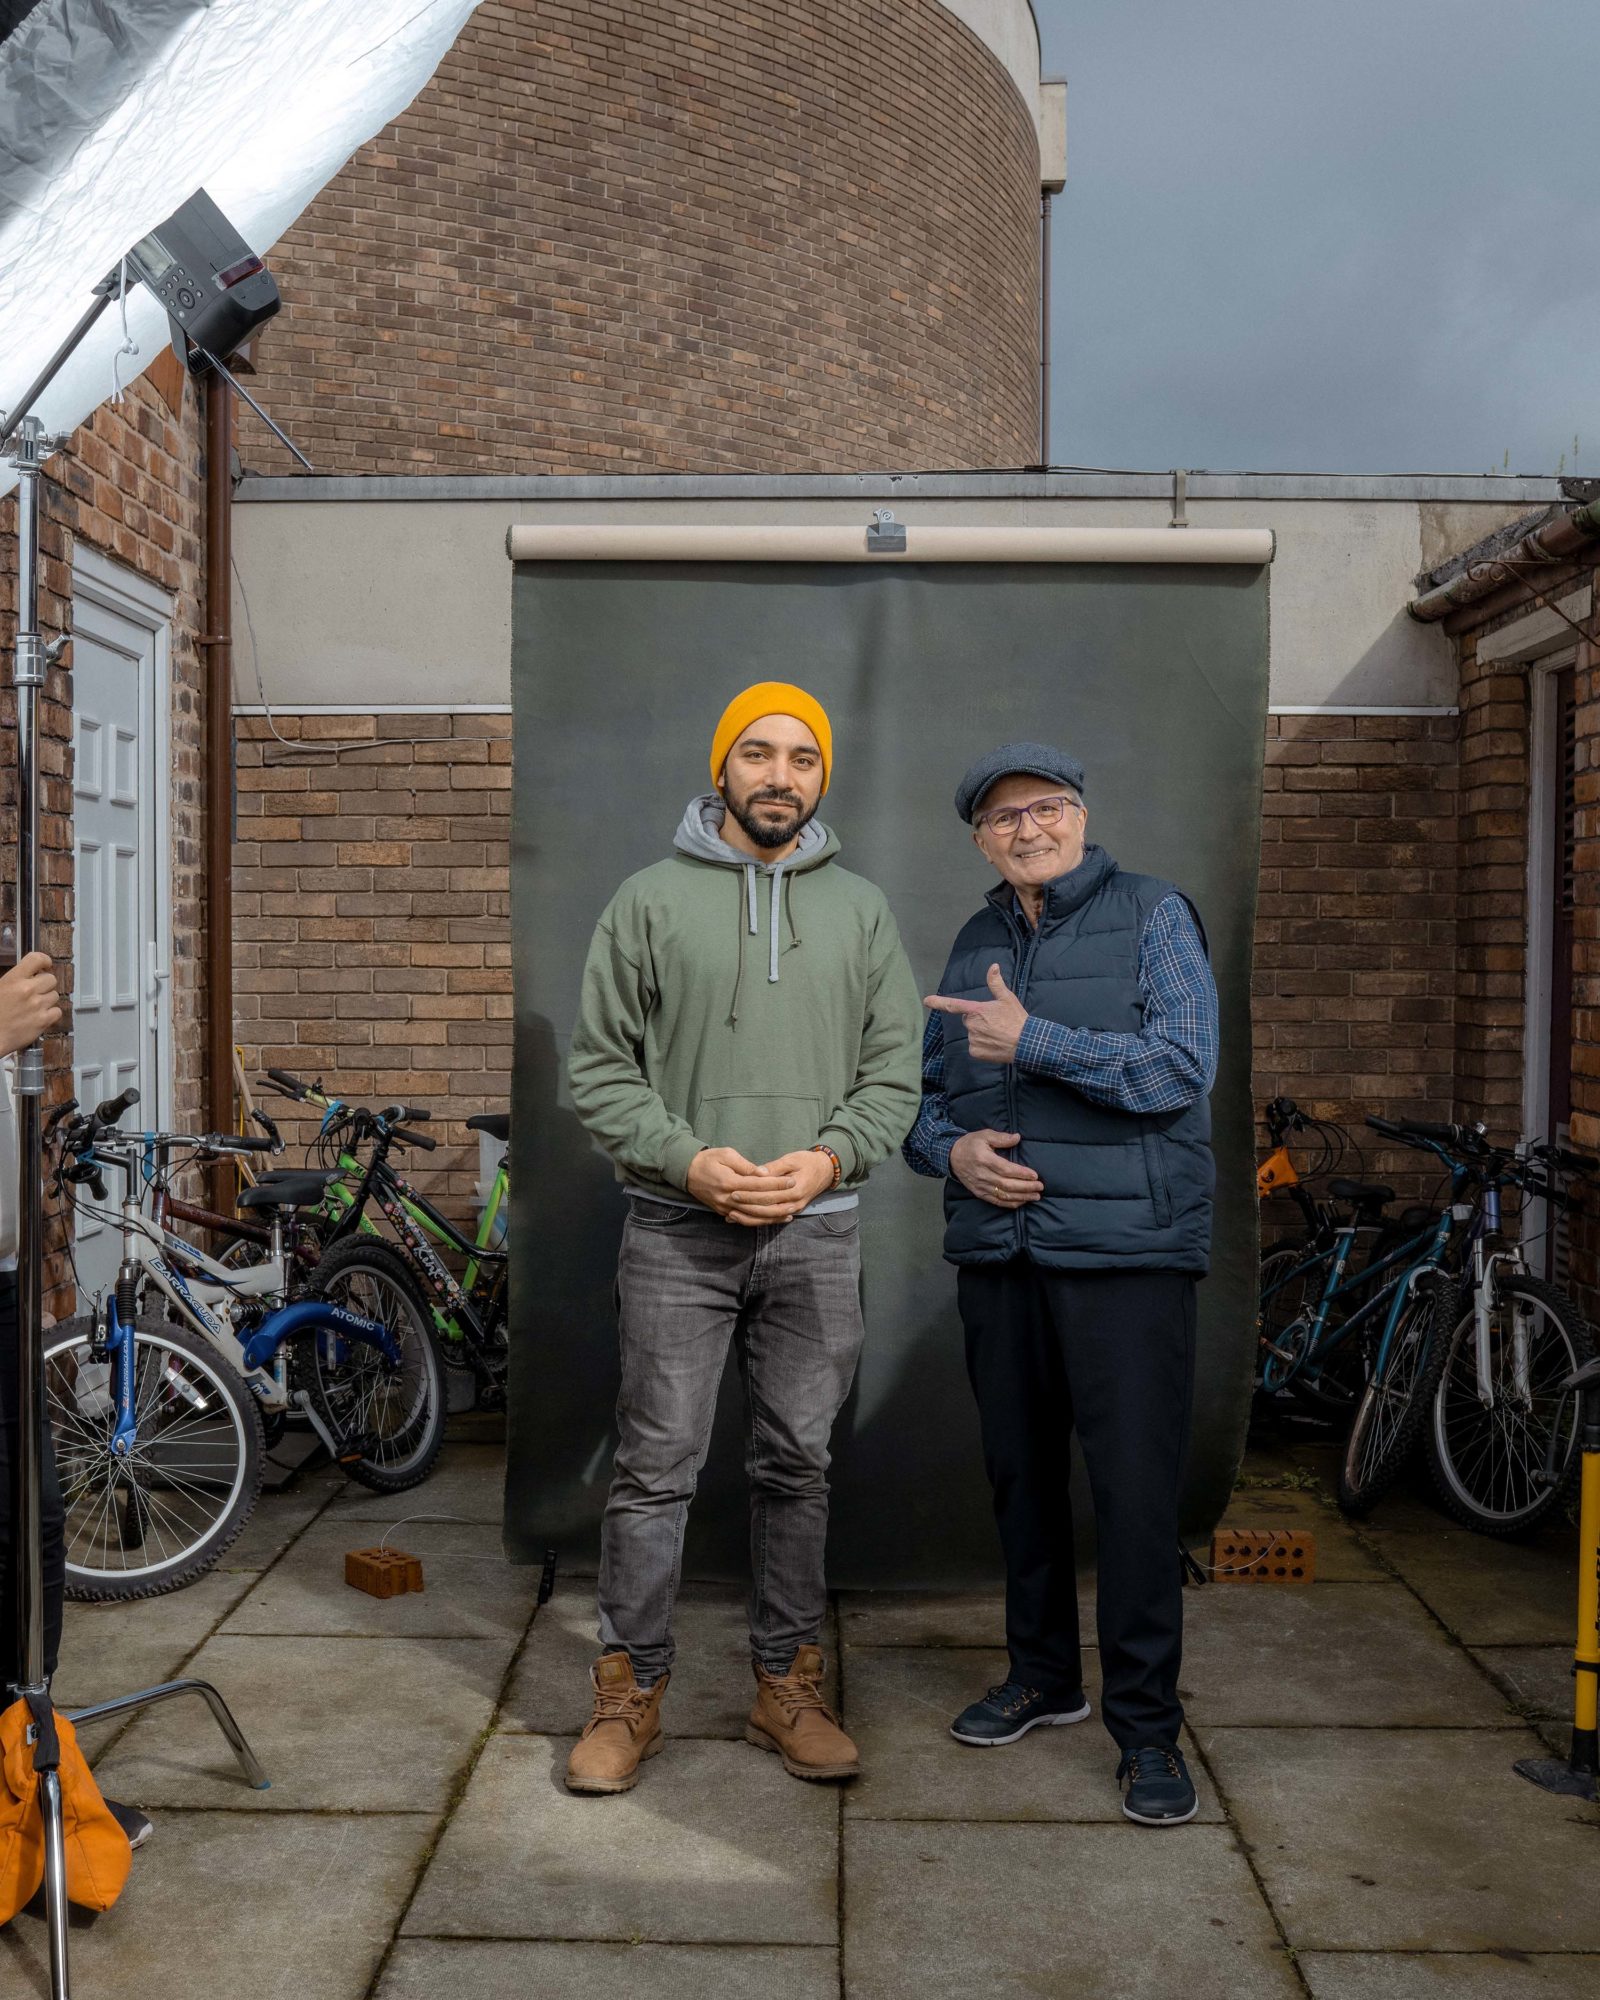 Two men stand outside in a yard in front of a photography screen, surrounded by bikes